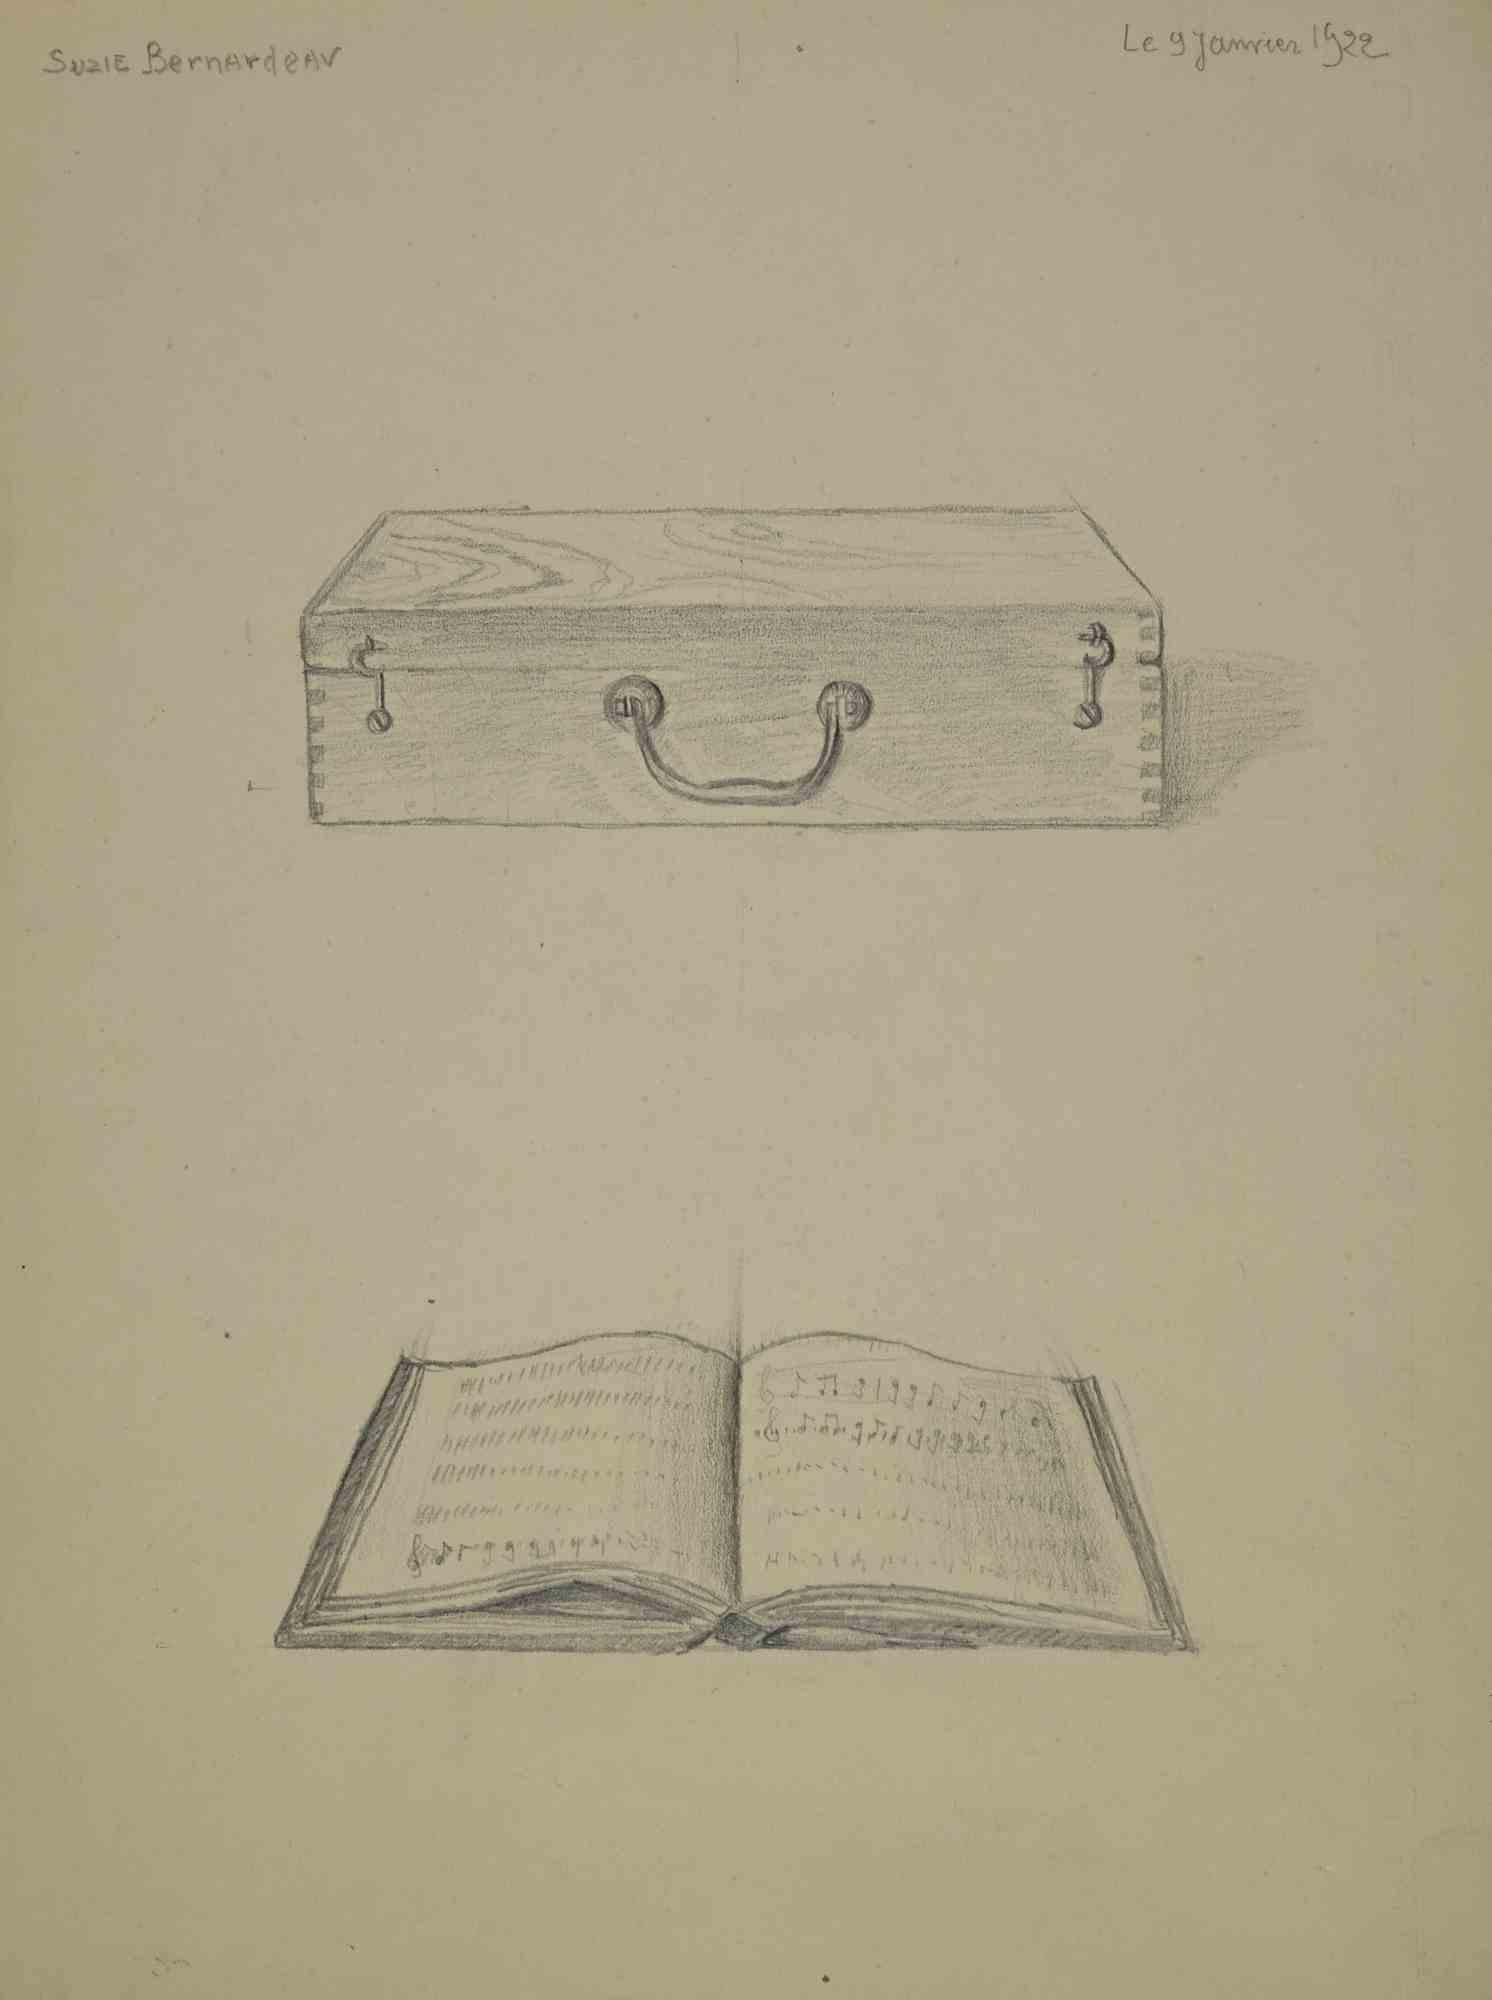 Briefcase is an artwork made by Suzie Bernardeau on 9 January 1922.

Pencil drawing.

Perfect condition.

Signed and dated.